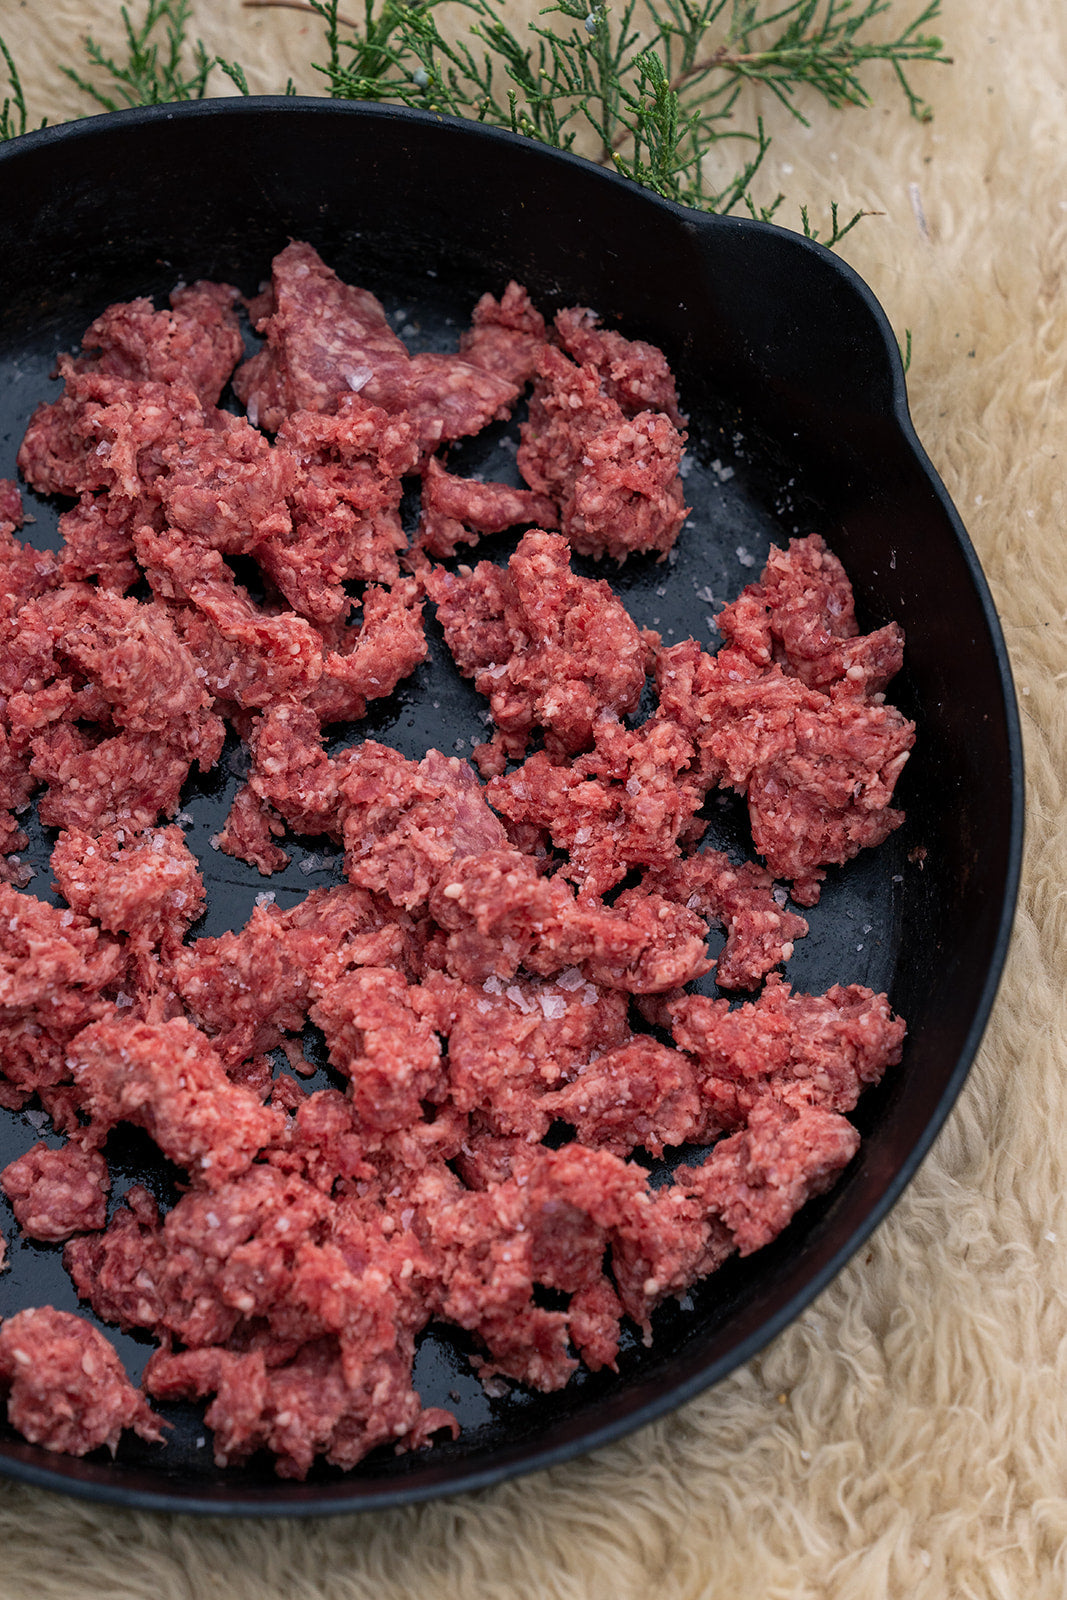 Dry Aged Ancestral Ground Beef Blend